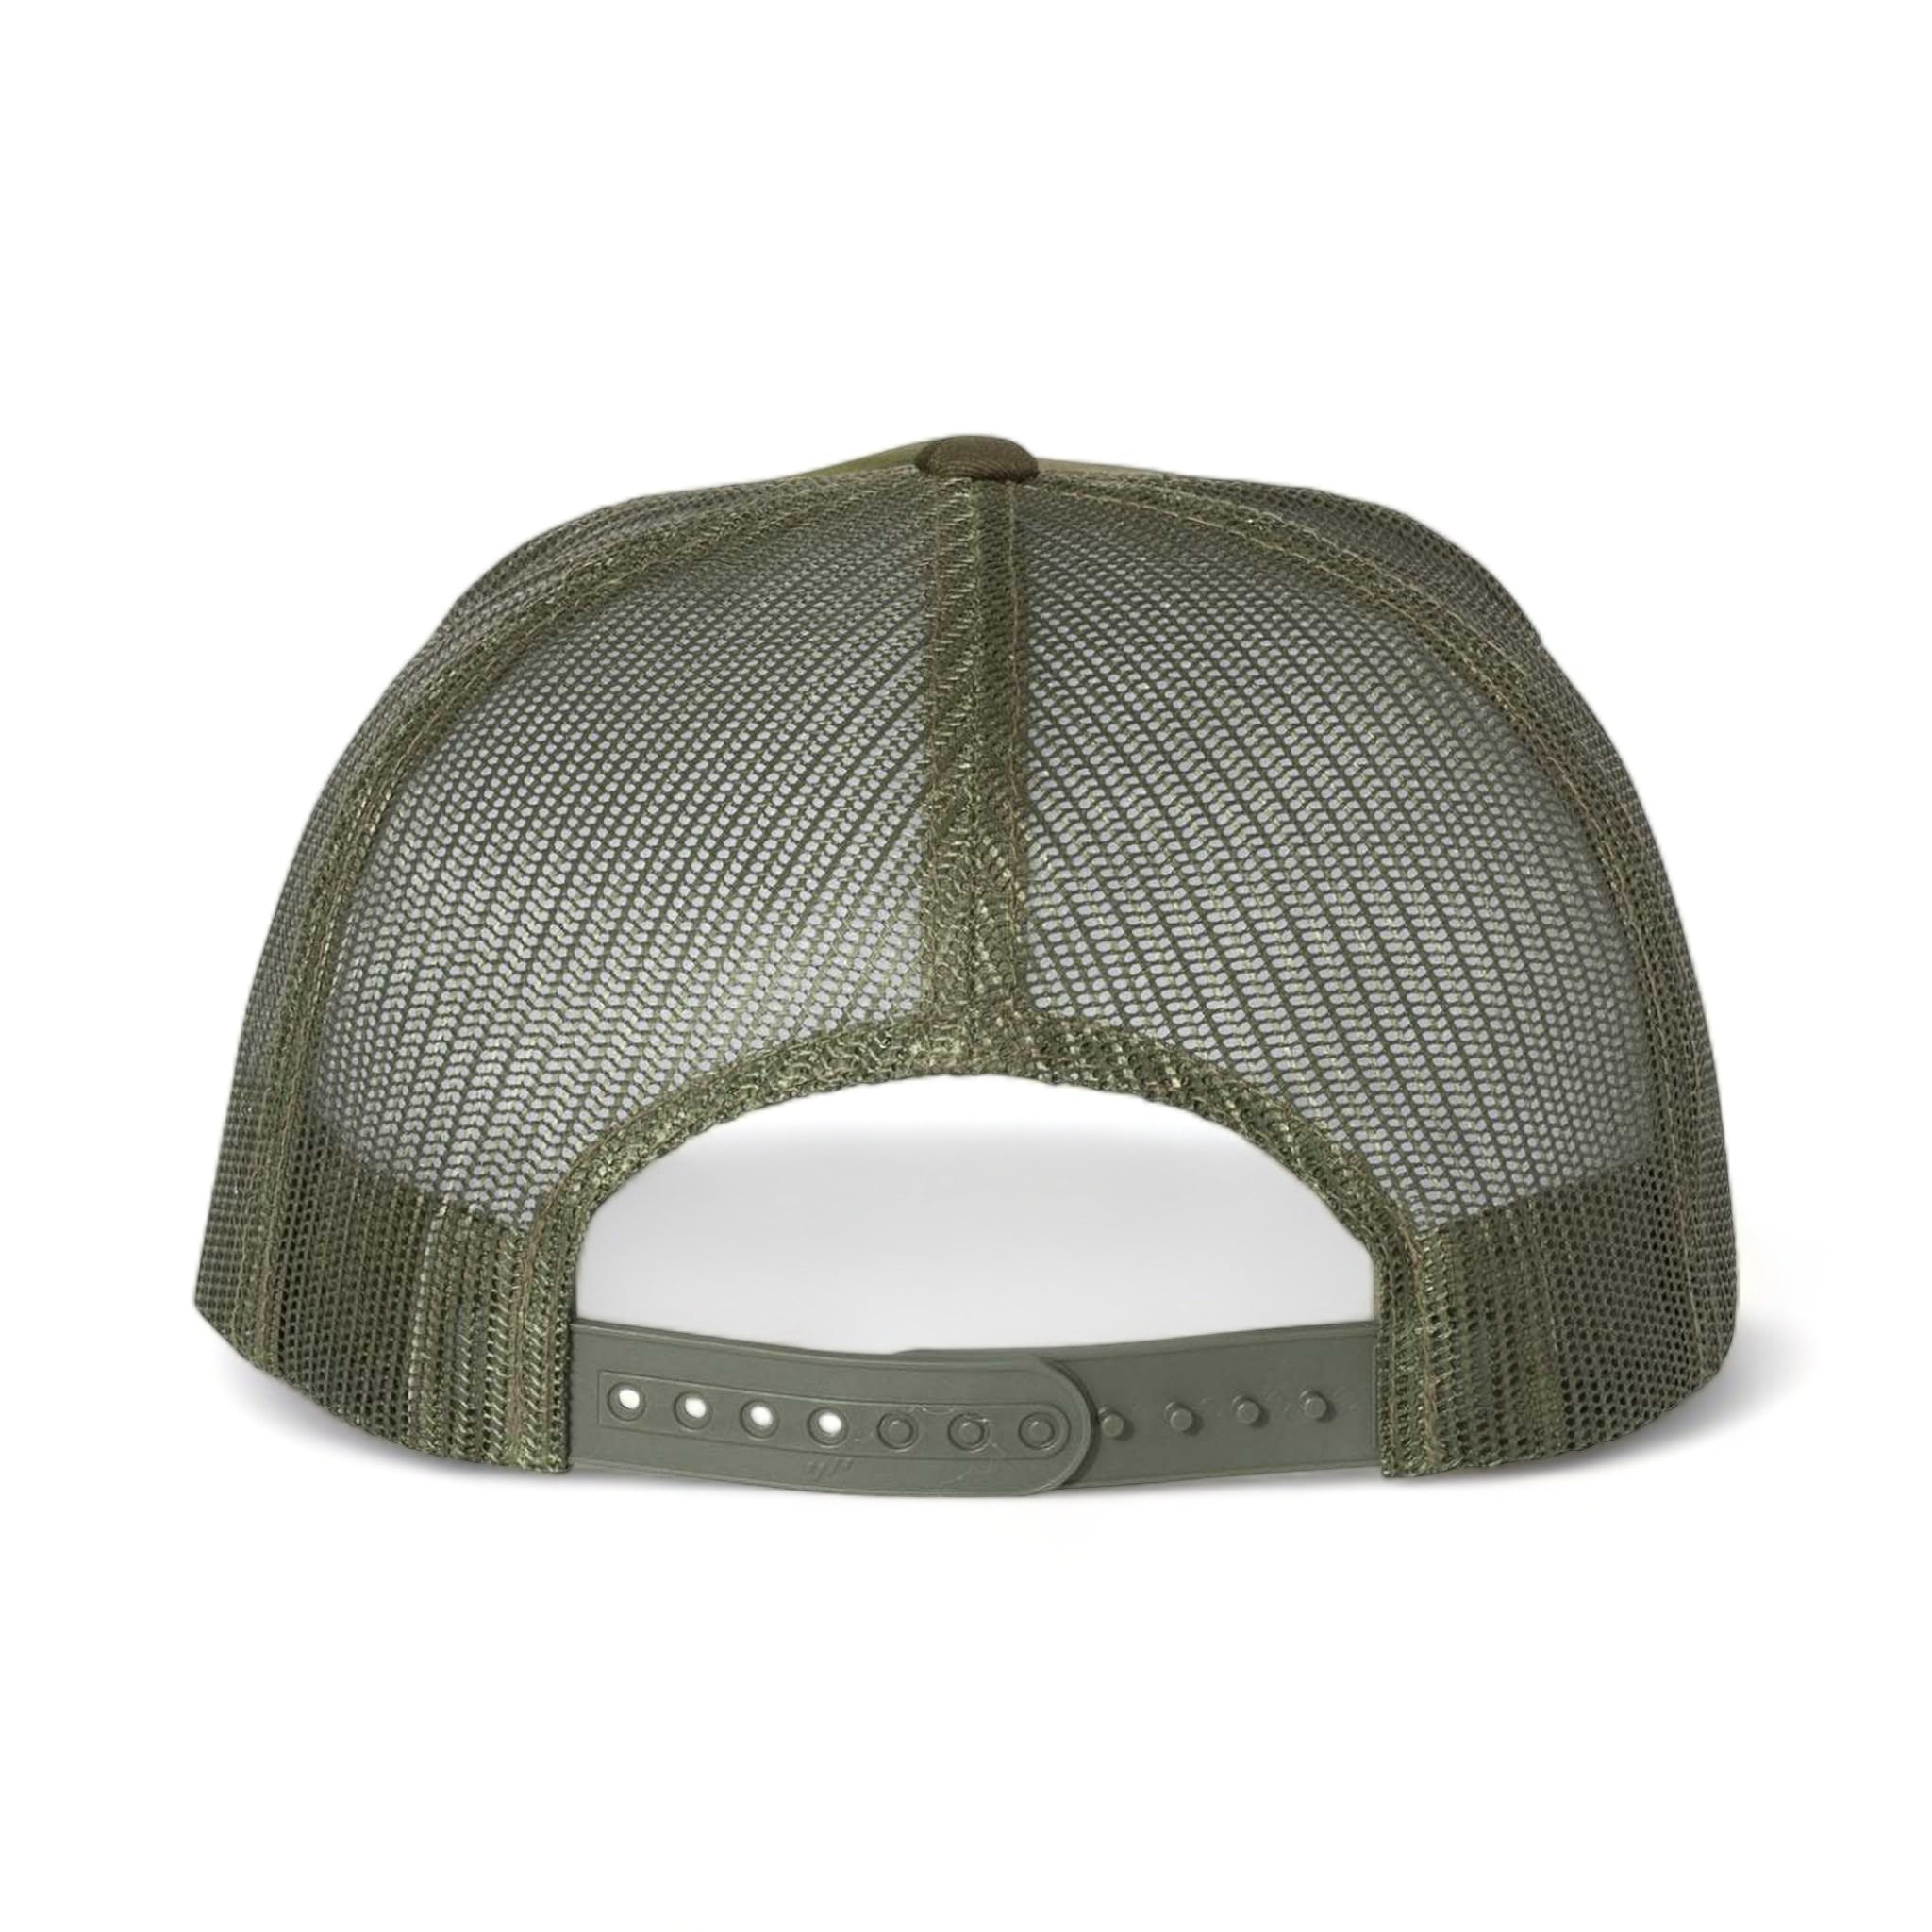 Back view of YP Classics 6006 custom hat in multicam tropic and green